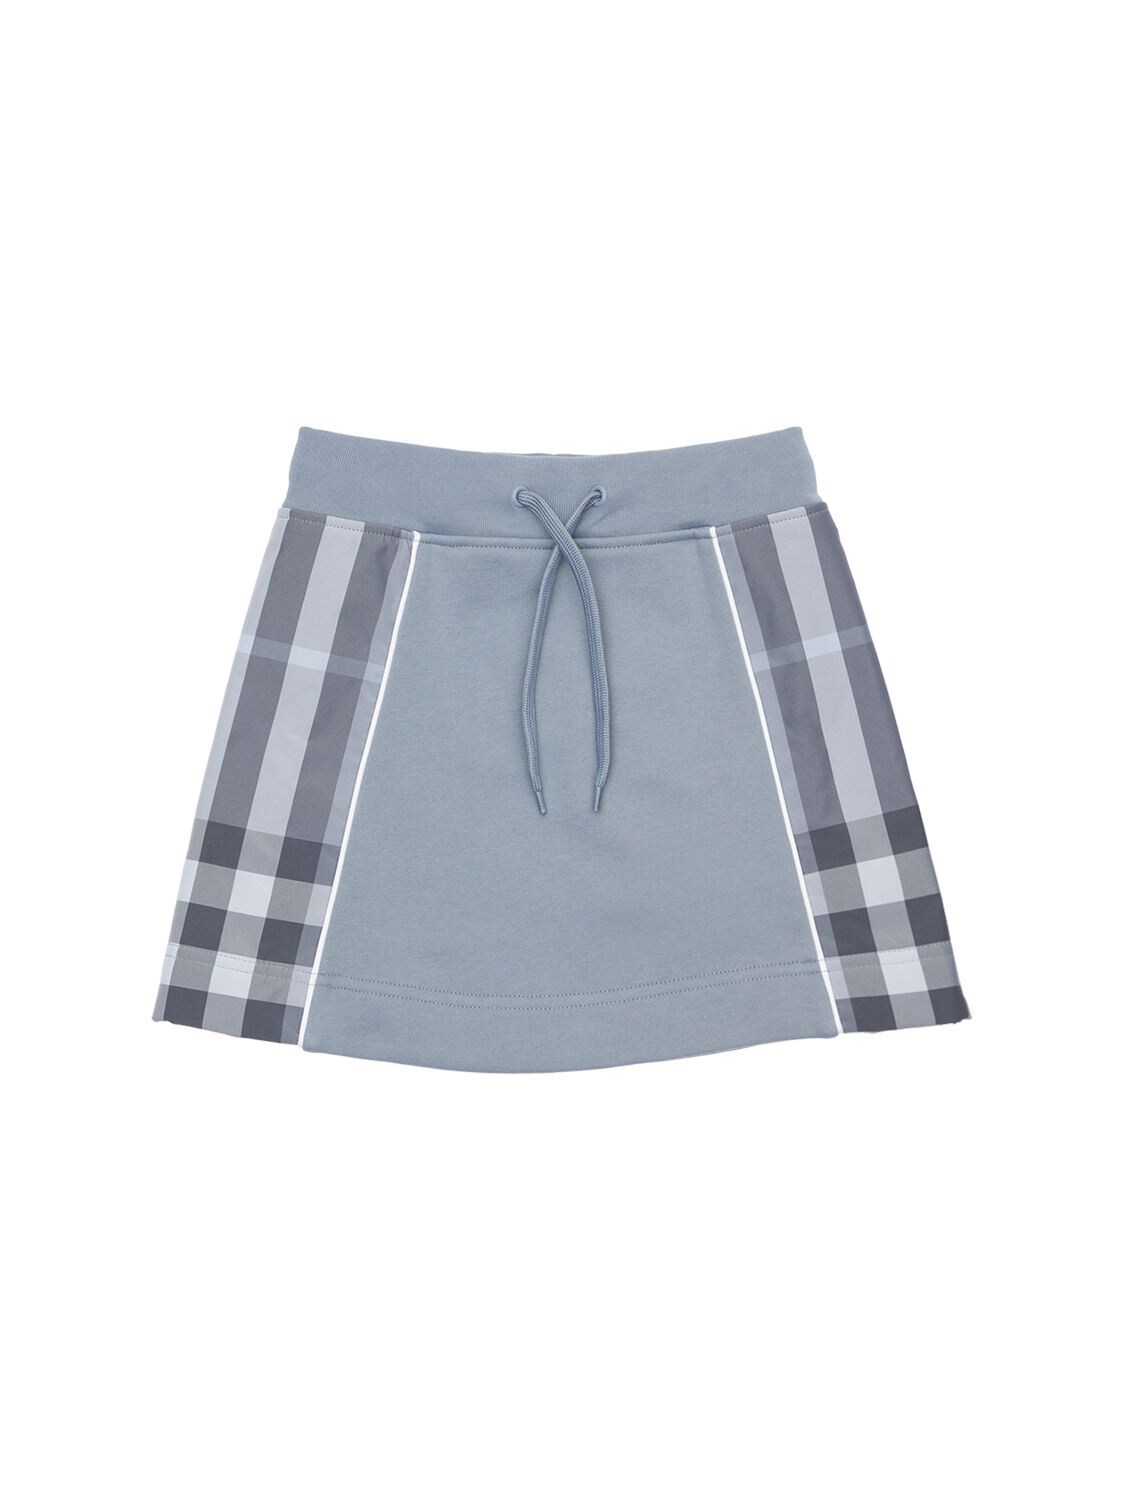 BURBERRY COTTON SKIRT W/ CHECK BANDS